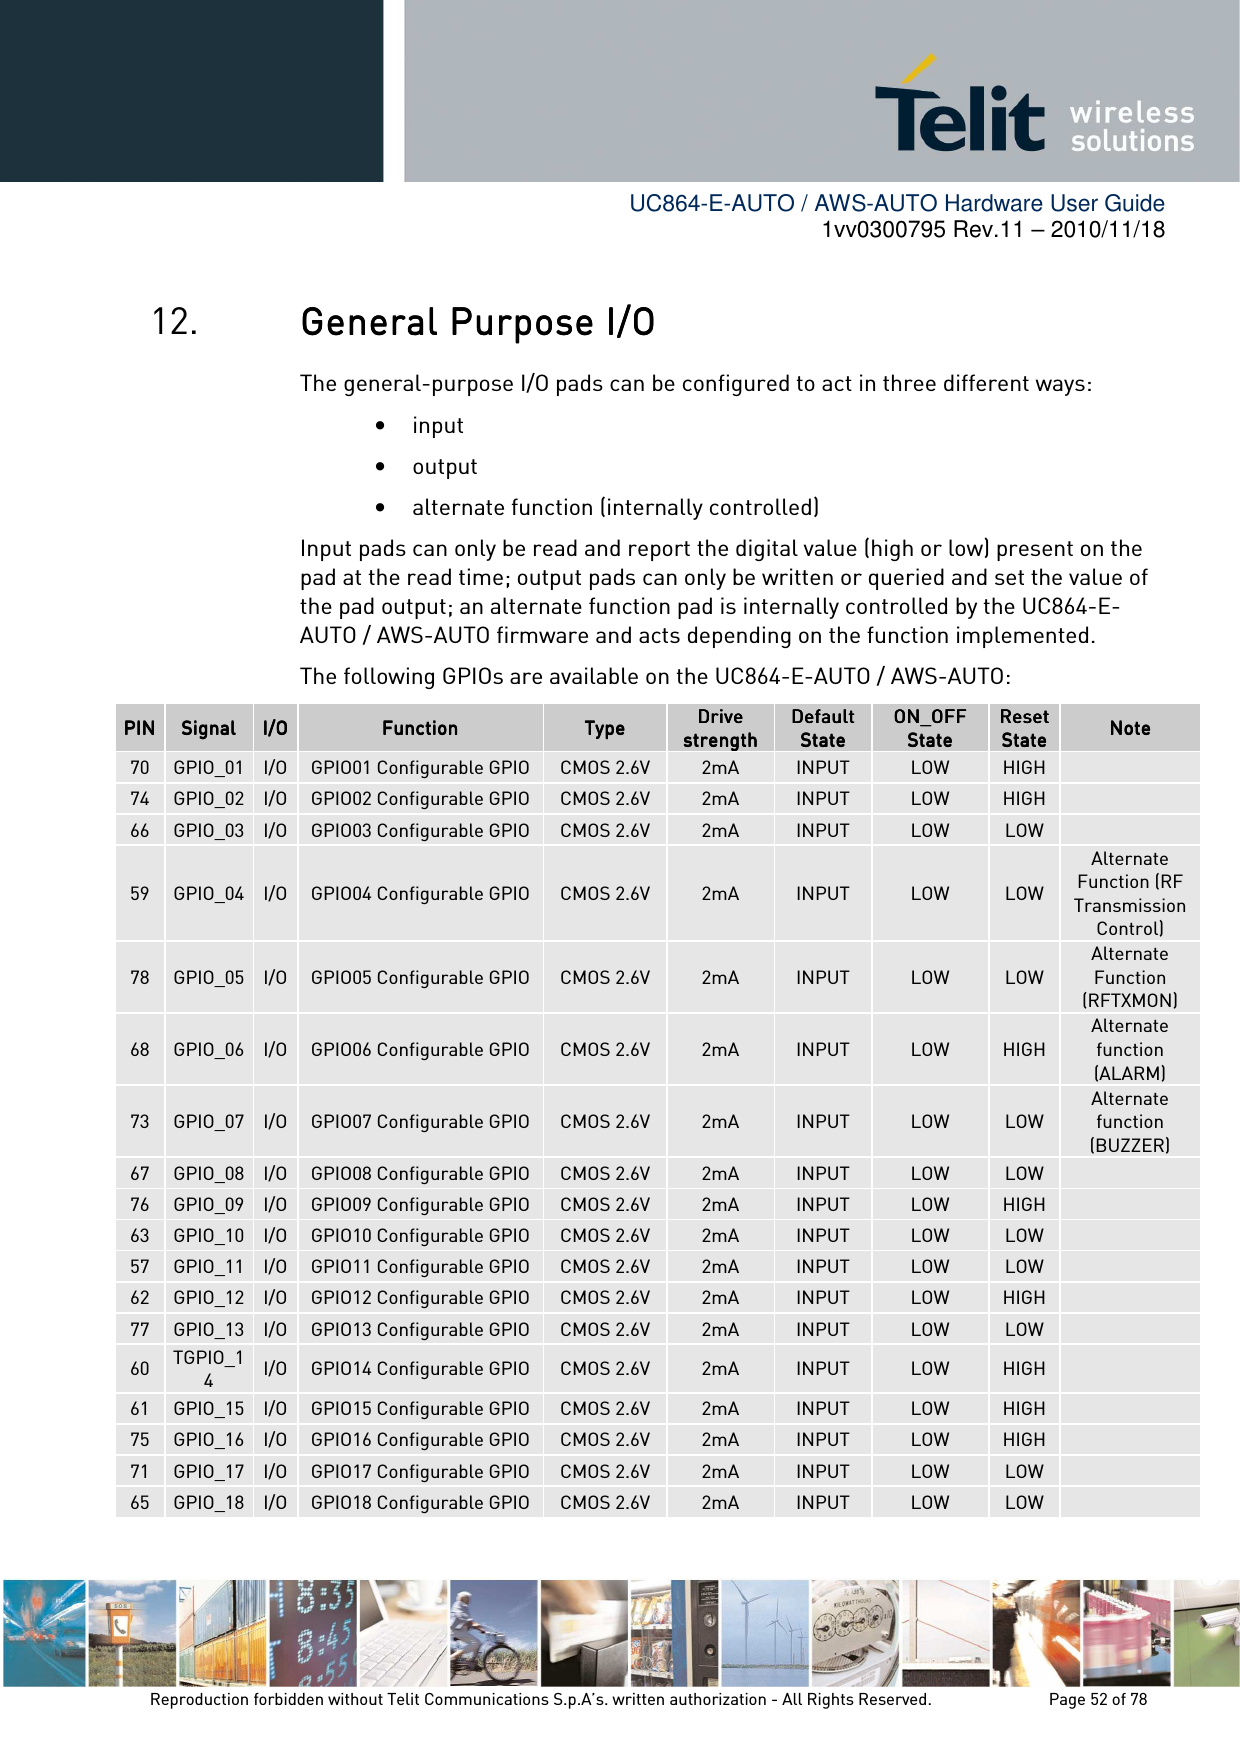        UC864-E-AUTO / AWS-AUTO Hardware User Guide 1vv0300795 Rev.11 – 2010/11/18     Reproduction forbidden without Telit Communications S.p.A’s. written authorization - All Rights Reserved.    Page 52 of 78  12. General Purpose I/OGeneral Purpose I/OGeneral Purpose I/OGeneral Purpose I/O    The general-purpose I/O pads can be configured to act in three different ways: • input • output • alternate function (internally controlled) Input pads can only be read and report the digital value (high or low) present on the pad at the read time; output pads can only be written or queried and set the value of the pad output; an alternate function pad is internally controlled by the UC864-E-AUTO / AWS-AUTO firmware and acts depending on the function implemented. The following GPIOs are available on the UC864-E-AUTO / AWS-AUTO: PINPINPINPIN    SignalSignalSignalSignal     I/OI/OI/OI/O    FunctionFunctionFunctionFunction     TypeTypeTypeType    Drive Drive Drive Drive strengthstrengthstrengthstrength    Default Default Default Default StateStateStateState    ON_OFF ON_OFF ON_OFF ON_OFF StateStateStateState    Reset Reset Reset Reset StateStateStateState    NoteNoteNoteNote    70  GPIO_01 I/O GPIO01 Configurable GPIO  CMOS 2.6V  2mA  INPUT  LOW  HIGH   74  GPIO_02 I/O GPIO02 Configurable GPIO  CMOS 2.6V  2mA  INPUT  LOW  HIGH   66  GPIO_03 I/O GPIO03 Configurable GPIO  CMOS 2.6V  2mA  INPUT  LOW  LOW   59  GPIO_04 I/O GPIO04 Configurable GPIO  CMOS 2.6V  2mA  INPUT  LOW  LOW Alternate Function (RF Transmission Control) 78  GPIO_05 I/O GPIO05 Configurable GPIO  CMOS 2.6V  2mA  INPUT  LOW  LOW Alternate Function (RFTXMON) 68  GPIO_06 I/O GPIO06 Configurable GPIO  CMOS 2.6V  2mA  INPUT  LOW  HIGH Alternate function (ALARM) 73  GPIO_07 I/O GPIO07 Configurable GPIO  CMOS 2.6V  2mA  INPUT  LOW  LOW Alternate function (BUZZER) 67  GPIO_08 I/O GPIO08 Configurable GPIO  CMOS 2.6V  2mA  INPUT  LOW  LOW   76  GPIO_09 I/O GPIO09 Configurable GPIO  CMOS 2.6V  2mA  INPUT  LOW  HIGH   63  GPIO_10 I/O GPIO10 Configurable GPIO  CMOS 2.6V  2mA  INPUT  LOW  LOW   57  GPIO_11 I/O GPIO11 Configurable GPIO  CMOS 2.6V  2mA  INPUT  LOW  LOW   62  GPIO_12 I/O GPIO12 Configurable GPIO  CMOS 2.6V  2mA  INPUT  LOW  HIGH   77  GPIO_13 I/O GPIO13 Configurable GPIO  CMOS 2.6V  2mA  INPUT  LOW  LOW   60  TGPIO_14  I/O GPIO14 Configurable GPIO  CMOS 2.6V  2mA  INPUT  LOW  HIGH   61  GPIO_15 I/O GPIO15 Configurable GPIO  CMOS 2.6V  2mA  INPUT  LOW  HIGH   75  GPIO_16 I/O GPIO16 Configurable GPIO  CMOS 2.6V  2mA  INPUT  LOW  HIGH   71  GPIO_17 I/O GPIO17 Configurable GPIO  CMOS 2.6V  2mA  INPUT  LOW  LOW   65  GPIO_18 I/O GPIO18 Configurable GPIO  CMOS 2.6V  2mA  INPUT  LOW  LOW   